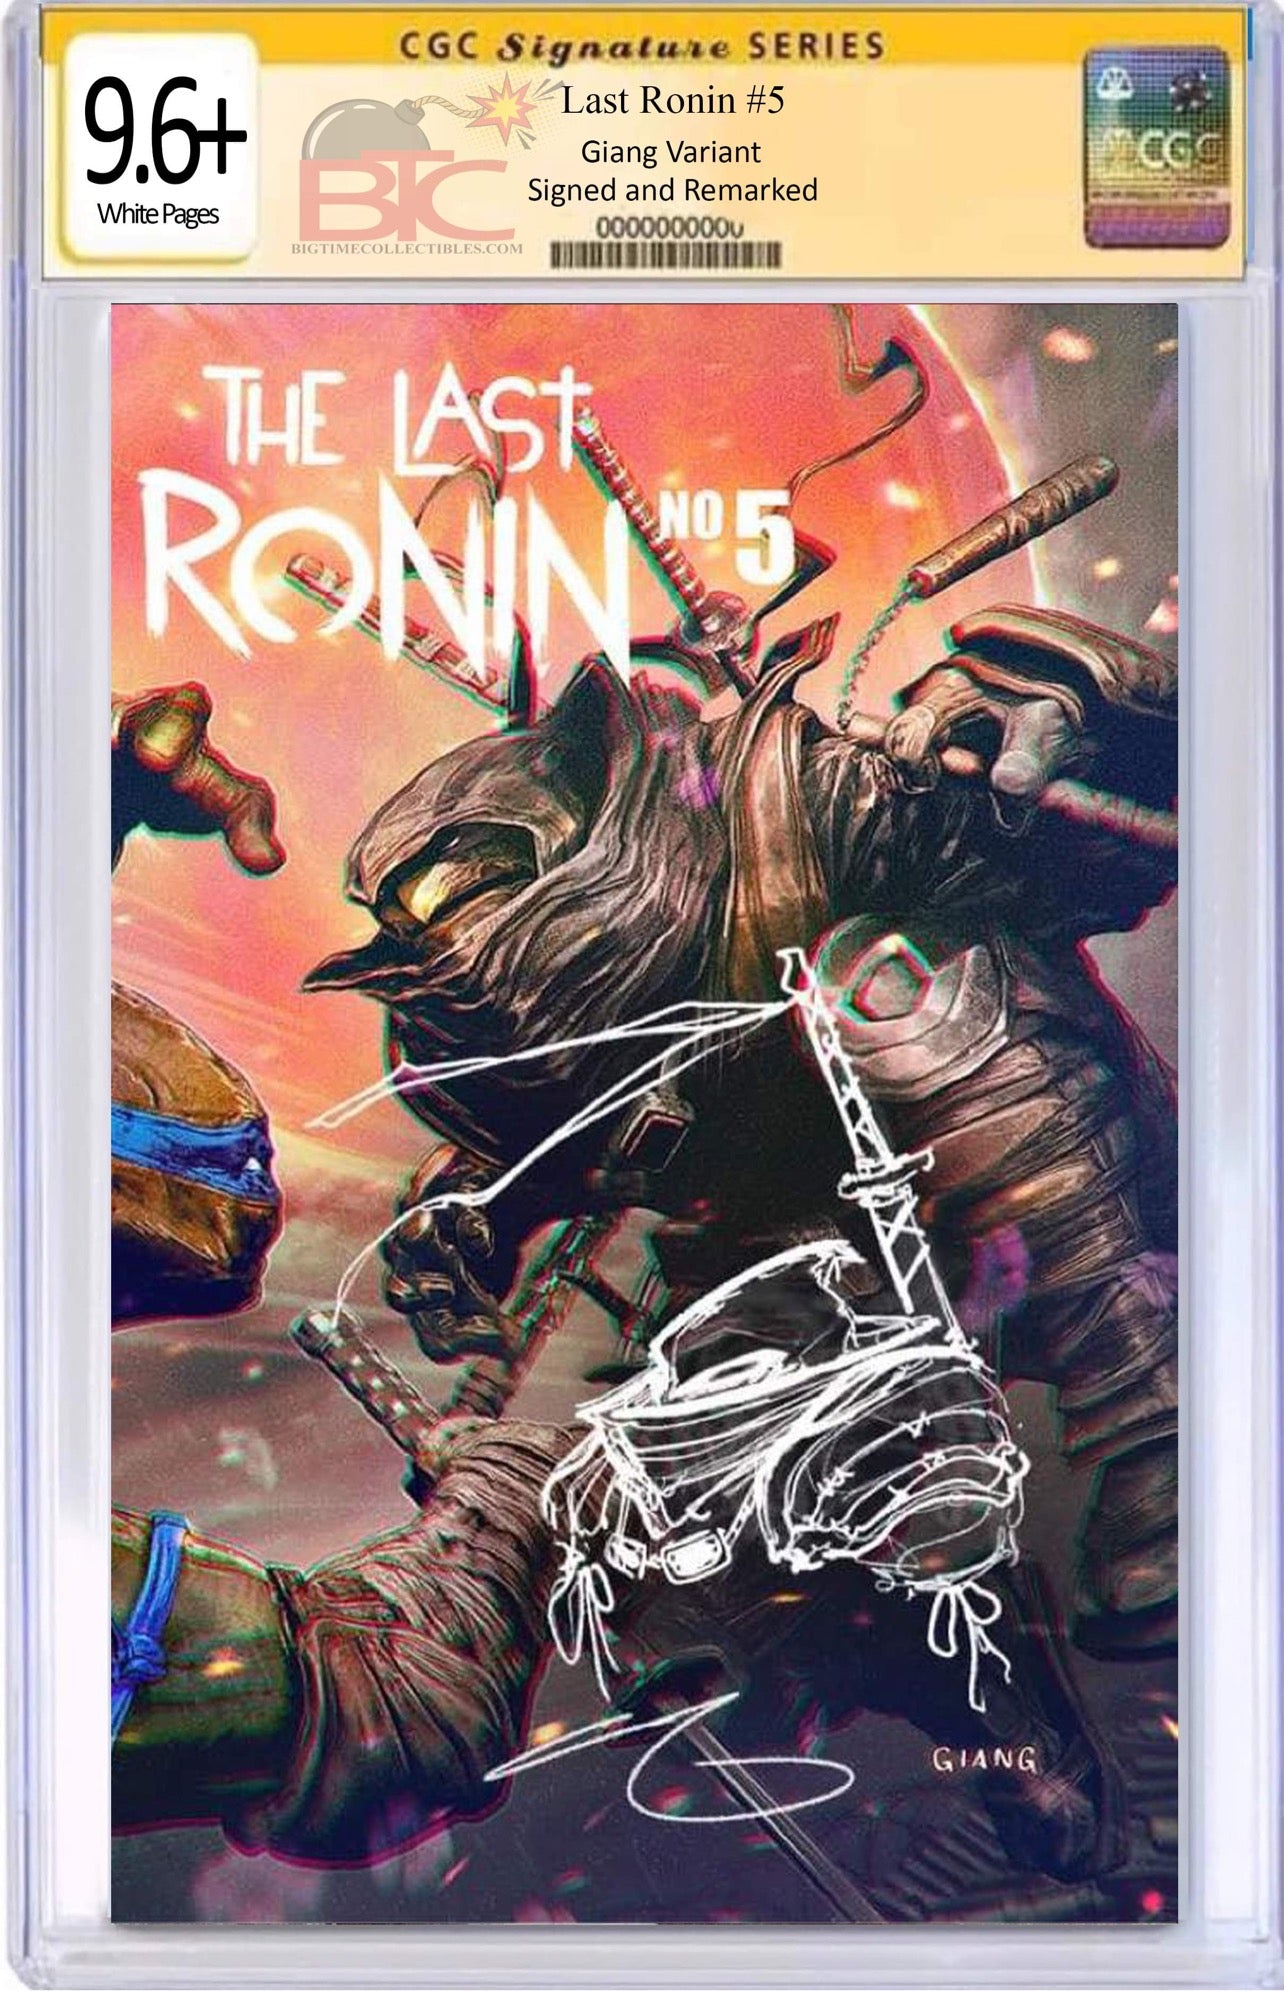 04/27/2022 TMNT THE LAST RONIN #5 JOHN GIANG EXCLUSIVE VARIANT